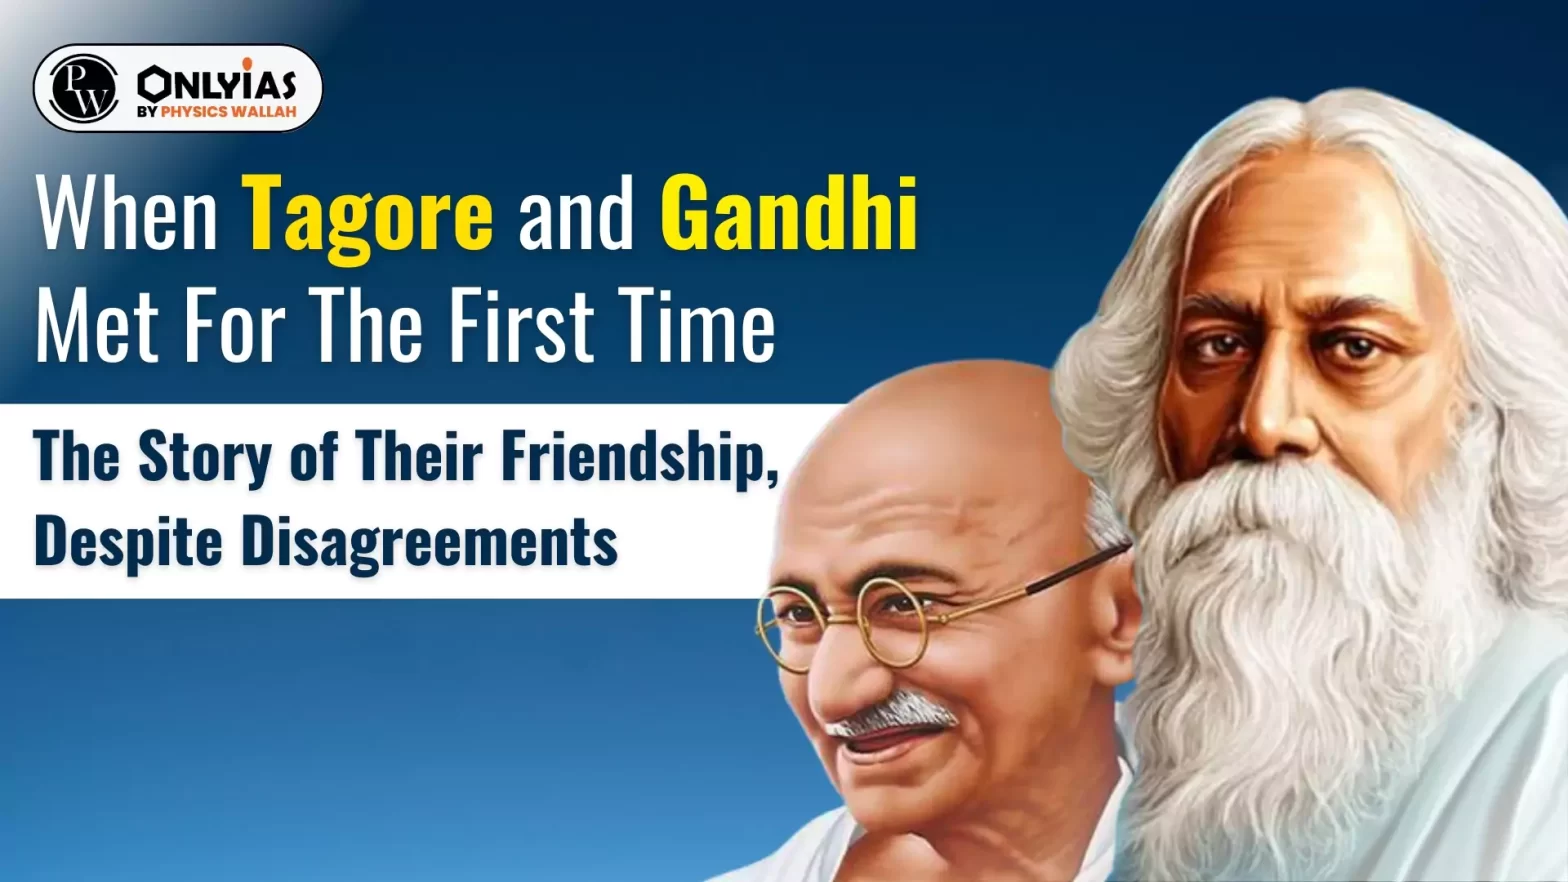 When Tagore and Gandhi Met For The First Time: The Story of Their Friendship, Despite Disagreements